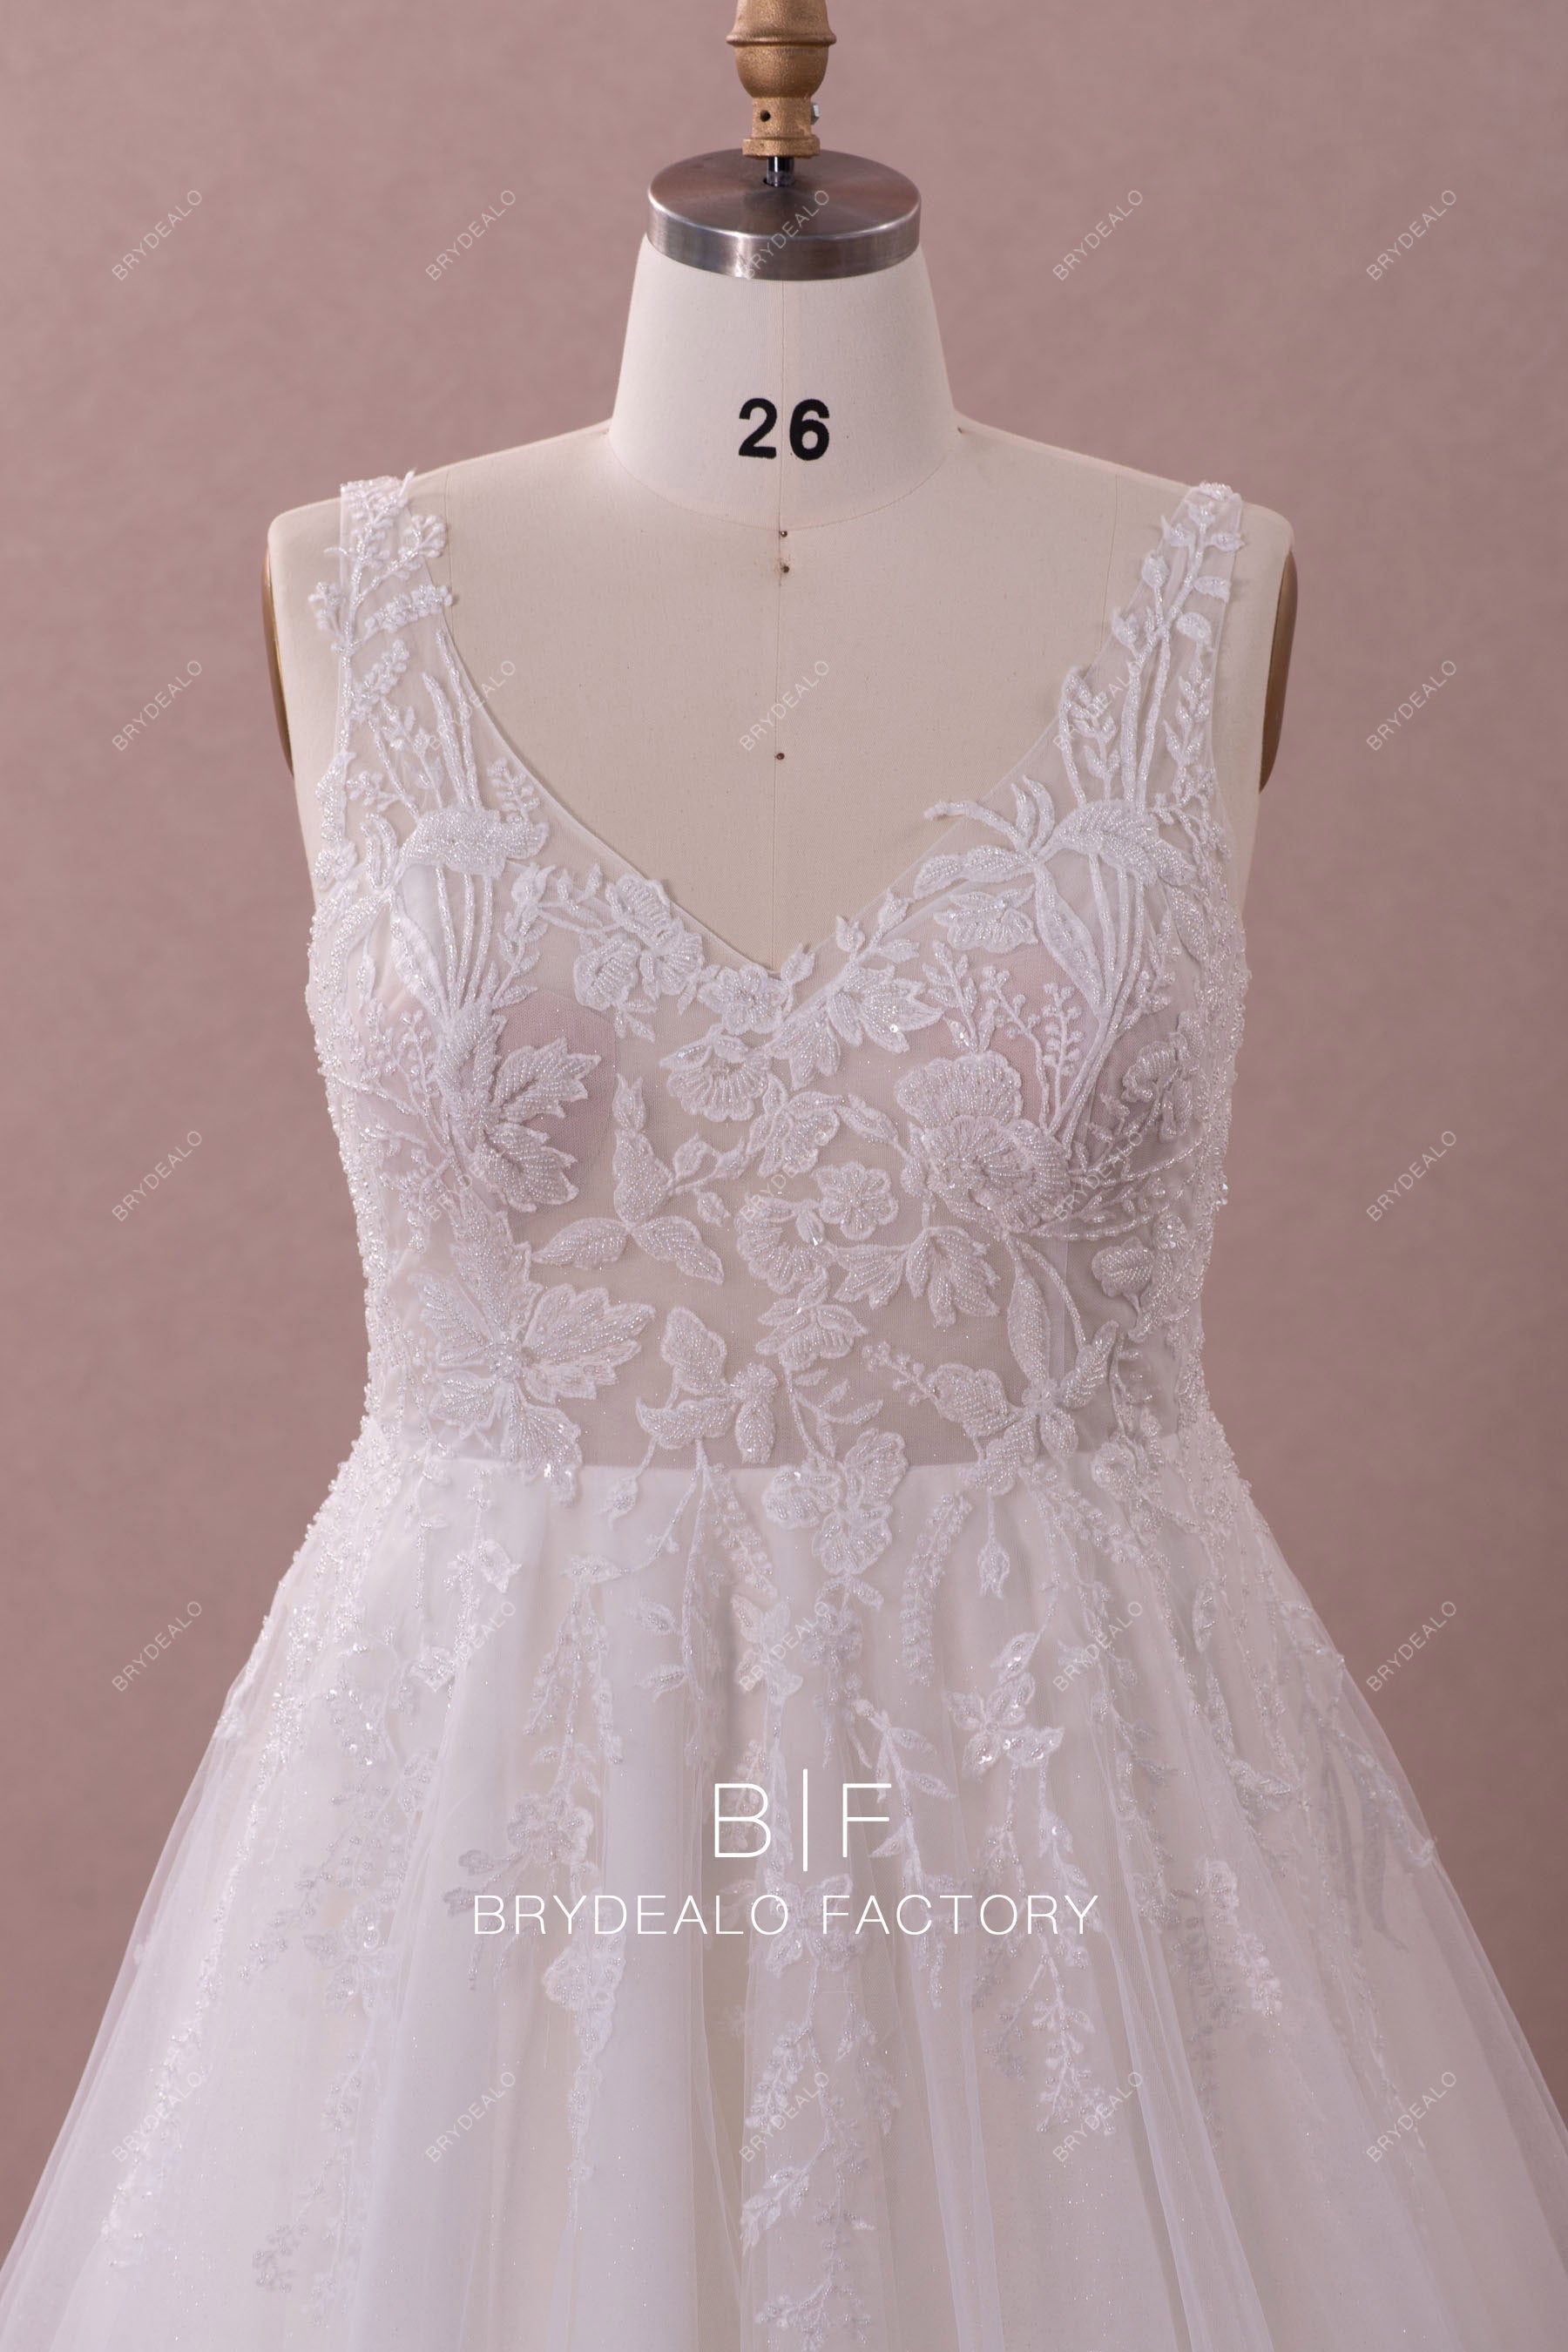 V-neck beaded flower lace straps A-line bridal gown